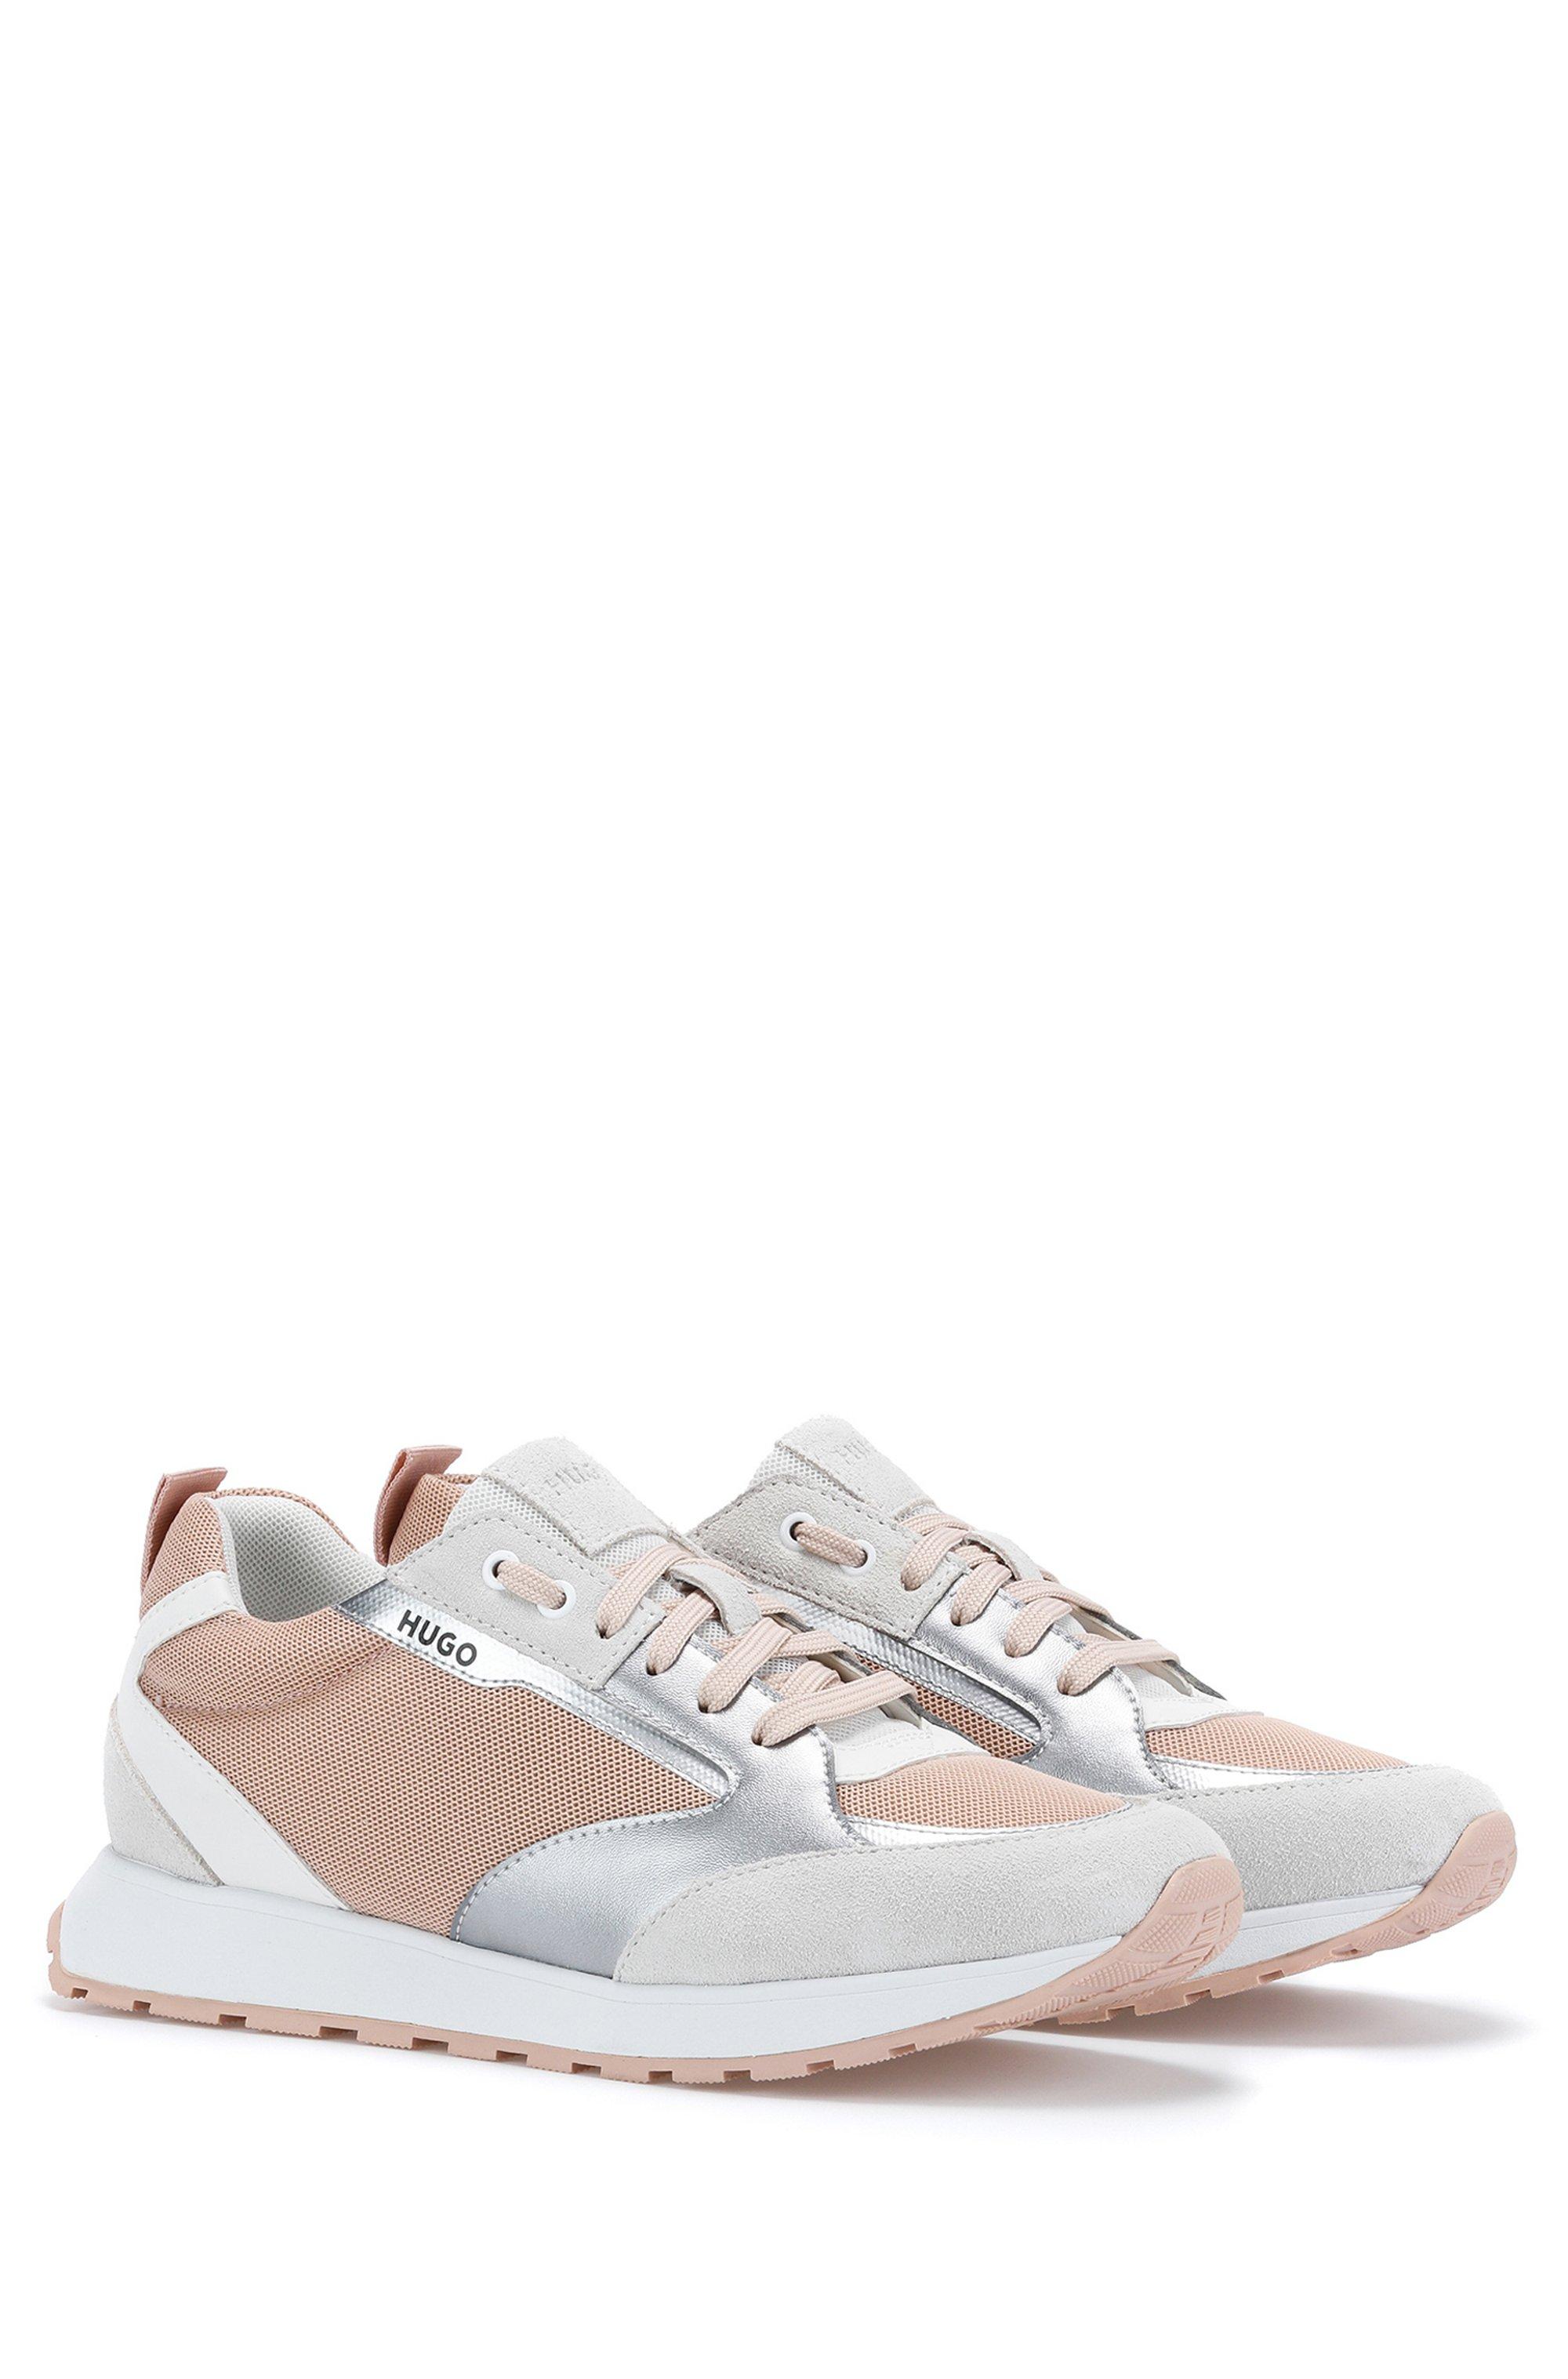 BOSS by HUGO BOSS Lace-up Trainers In Mixed Materials With Metallic Trims-  Light Beige Women's Sneakers Size 10 in Natural | Lyst